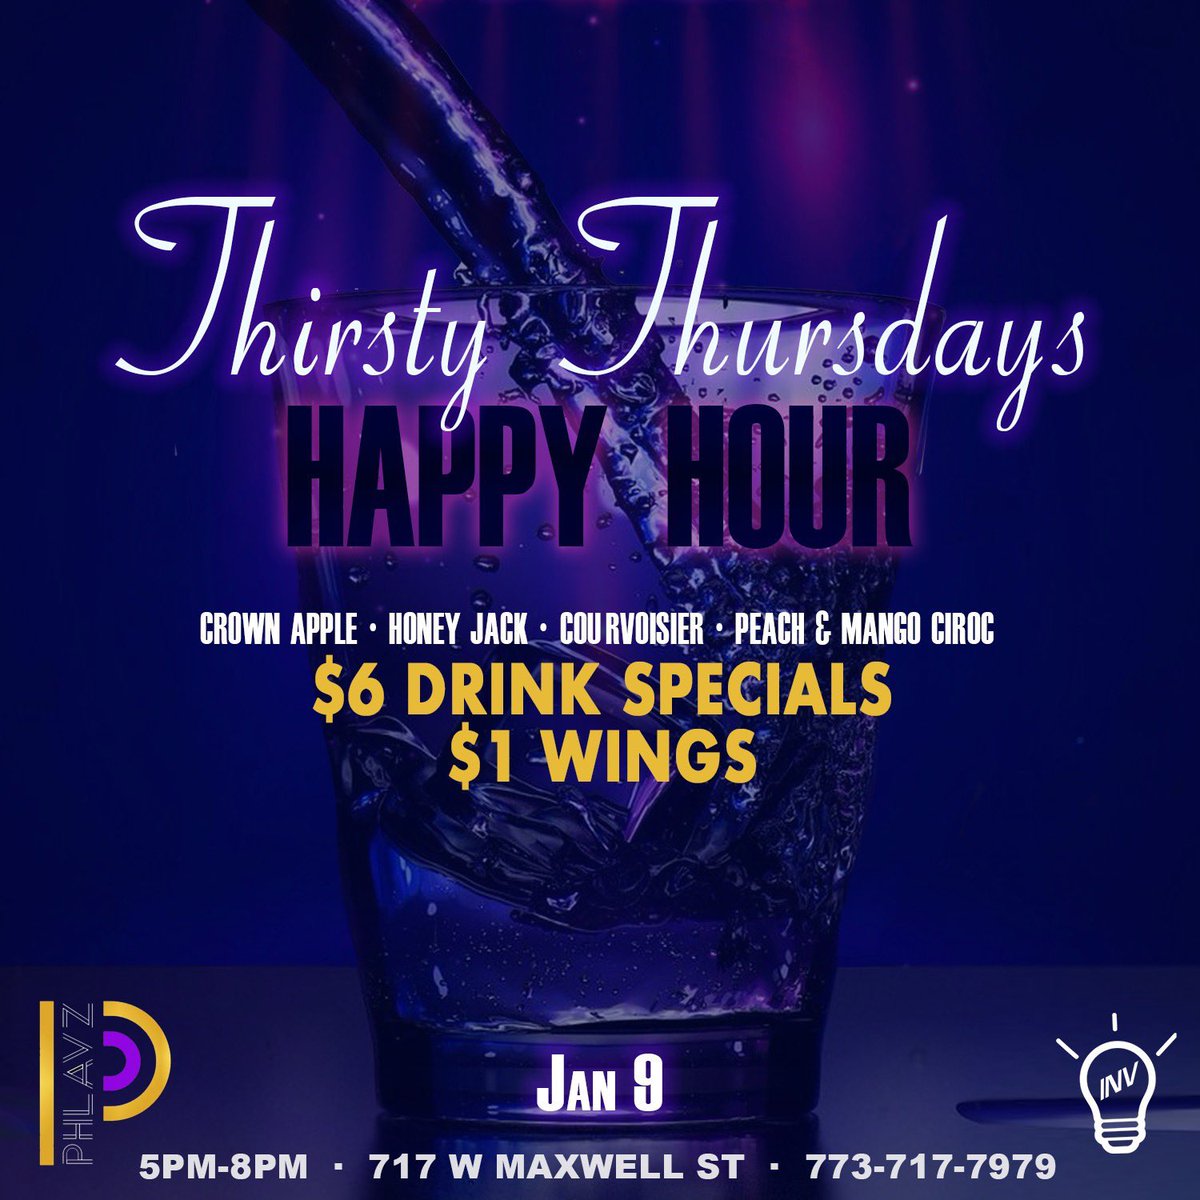 Chicago pull up on us we kick 2020 with a Happy Hour vibe at the spot Phlavz!! Jan 9th 5-8pm $6 Drink Specials and $1 Wings #HappyHourChicago #TheINVpresents